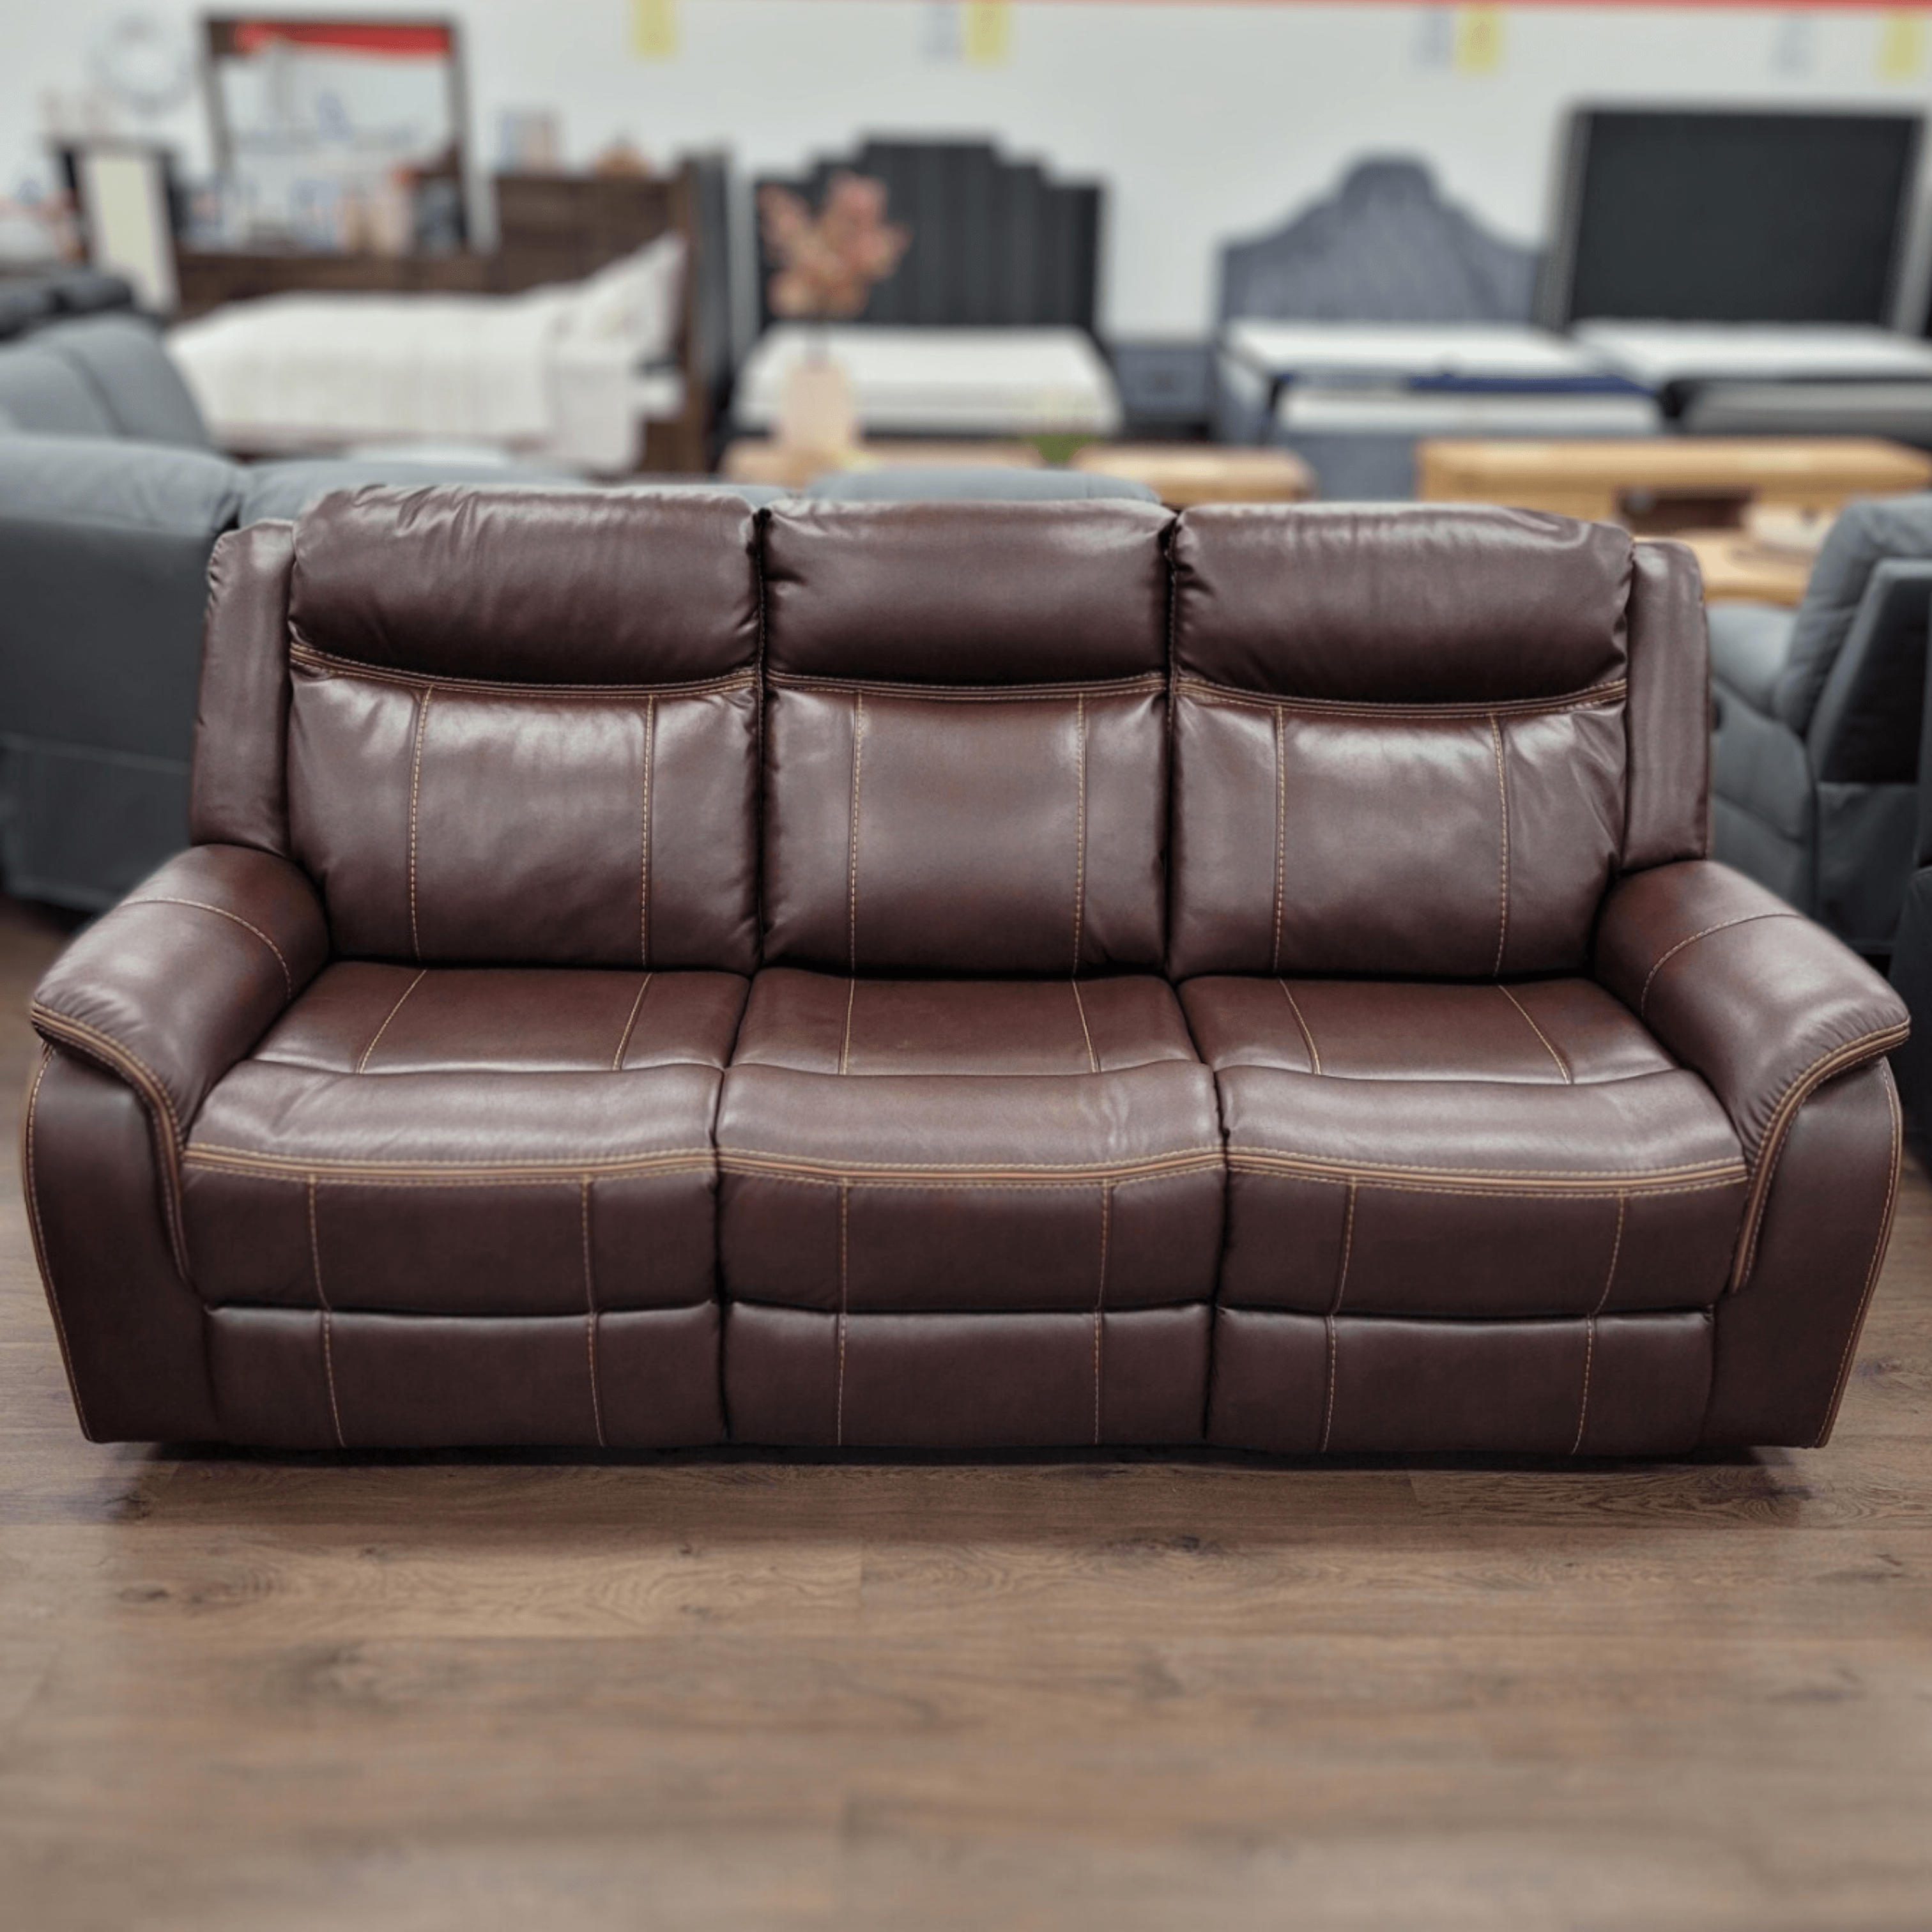 Sunshine 3 Seater Air Leather Recliner Lounge